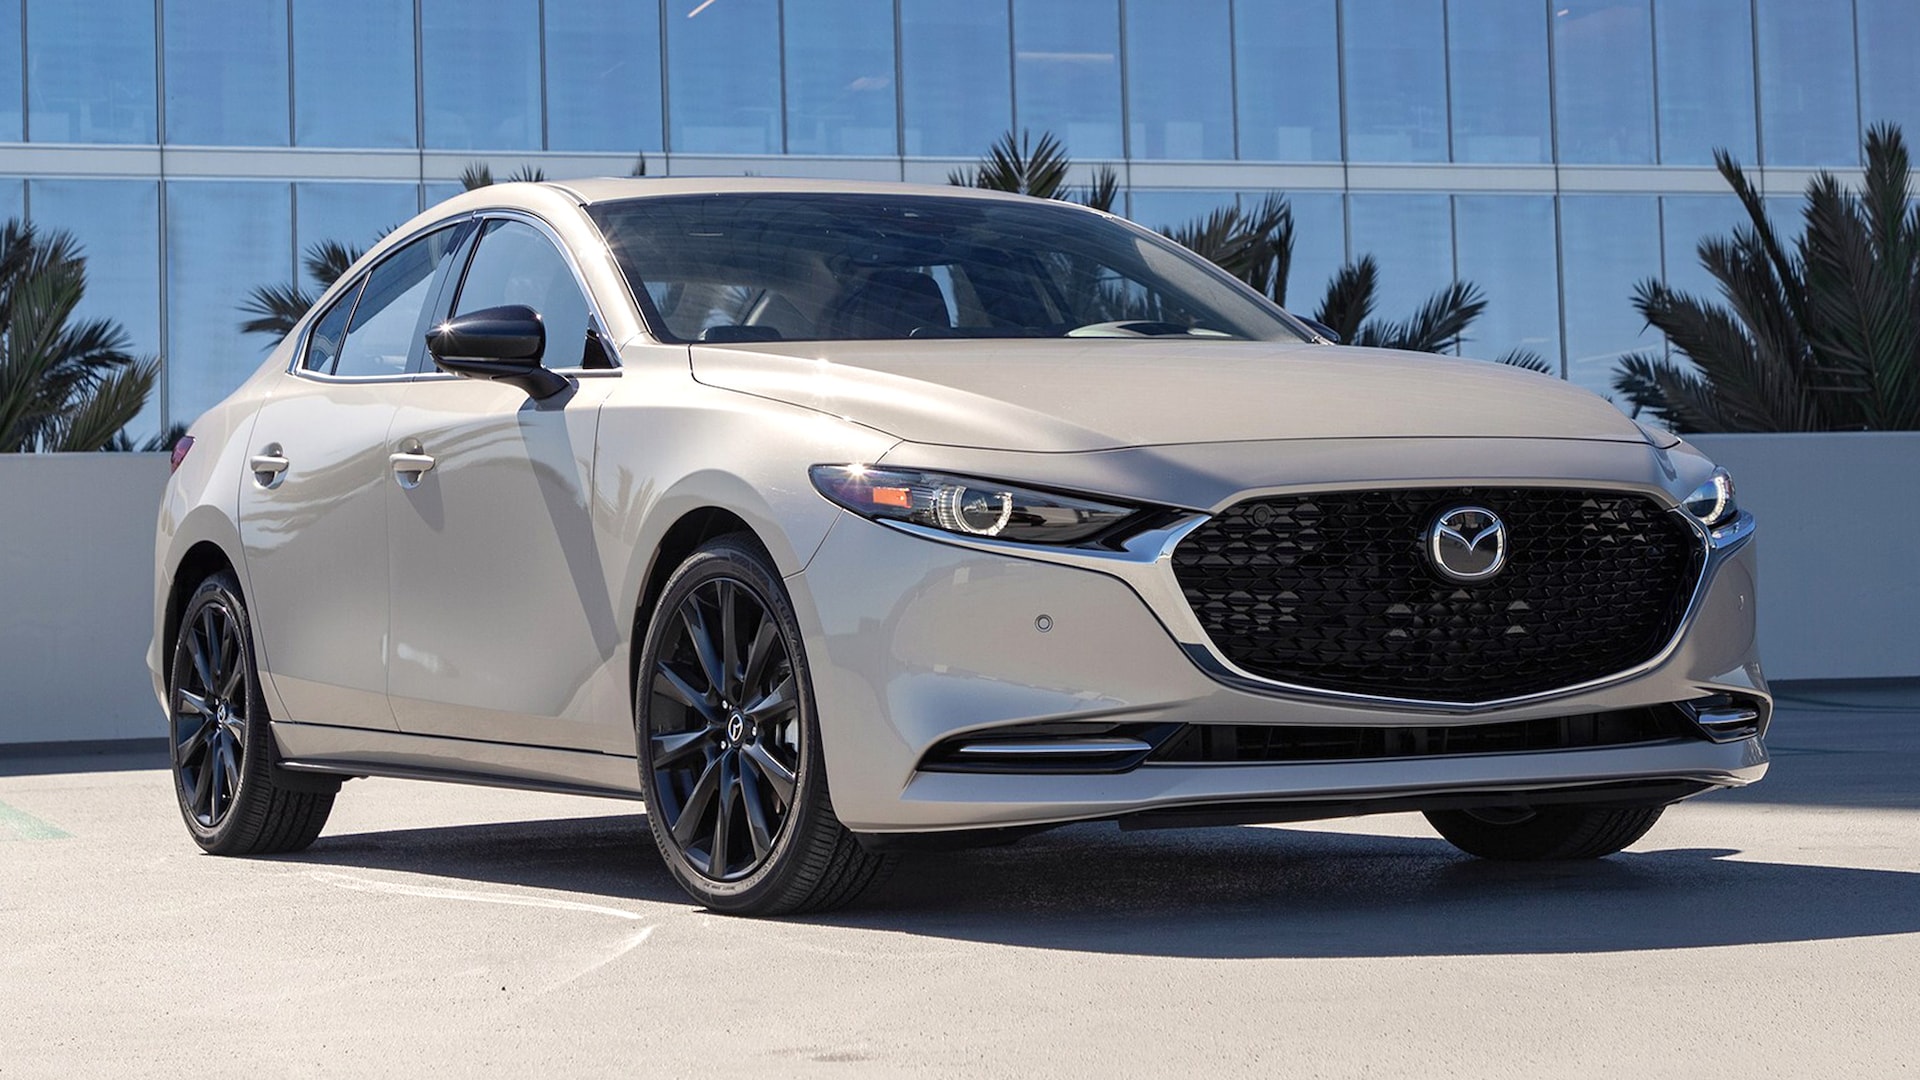 2023 Mazda Mazda3 Prices, Reviews, and Photos - MotorTrend